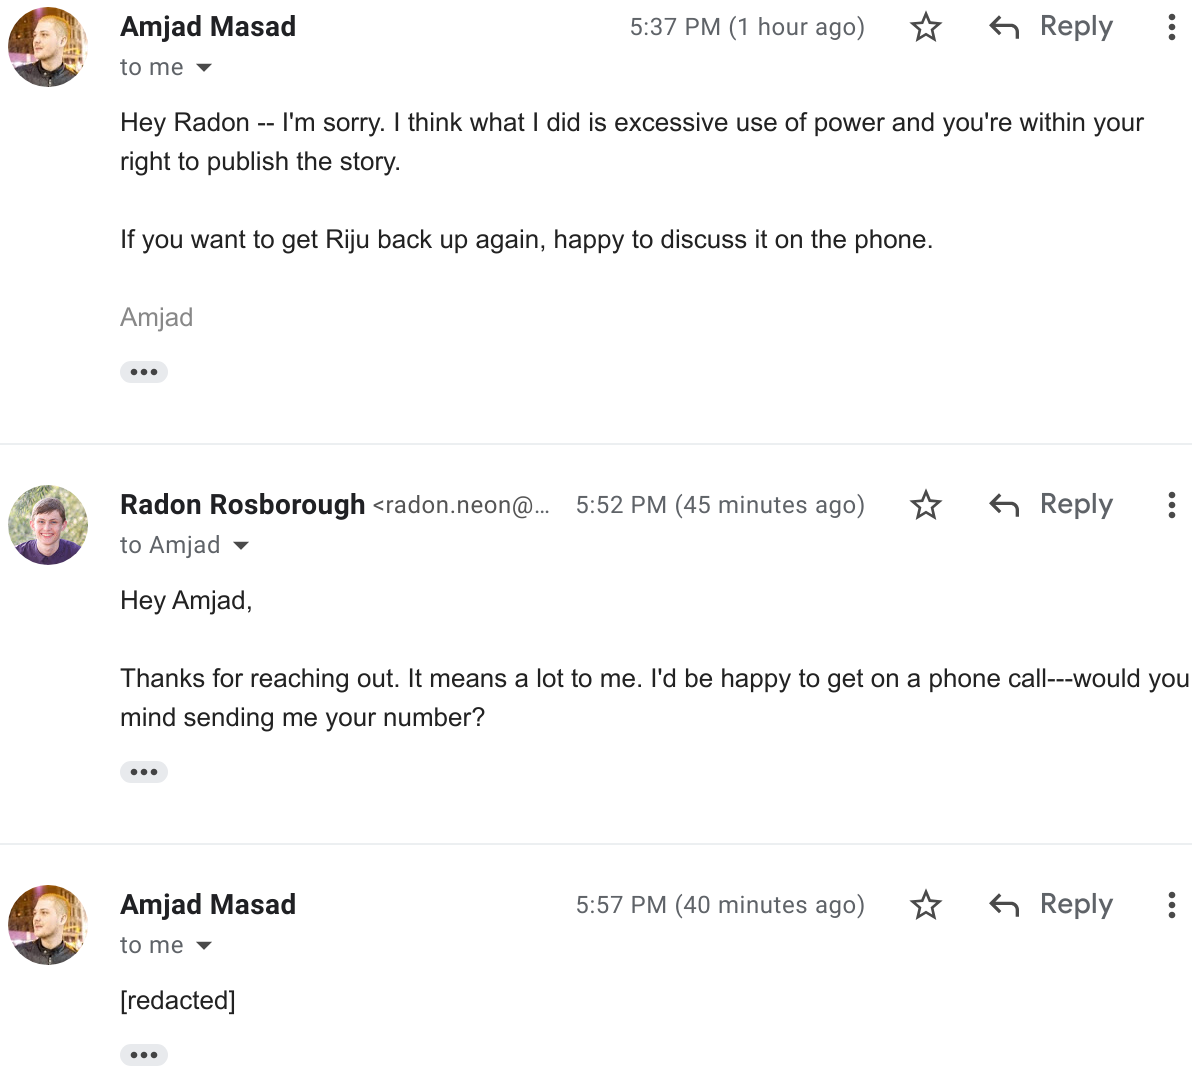 Screenshot of an
email from Amjad promising that he will not sue me, and my response
thanking him and clarifying a point about how he quoted me